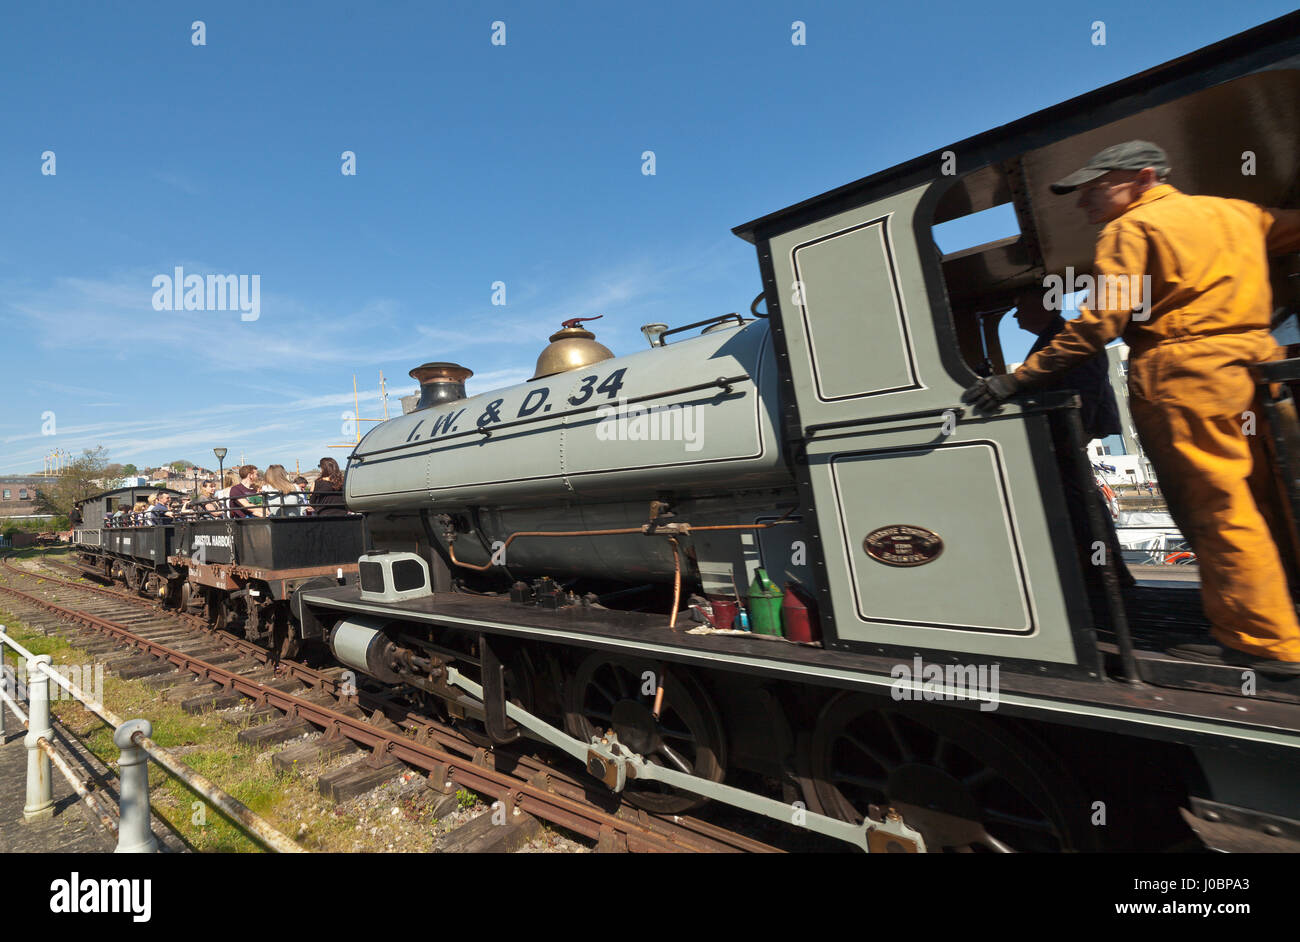 Bristol Harbour Railway steam engine, taking passengers for a ride. Stock Photo